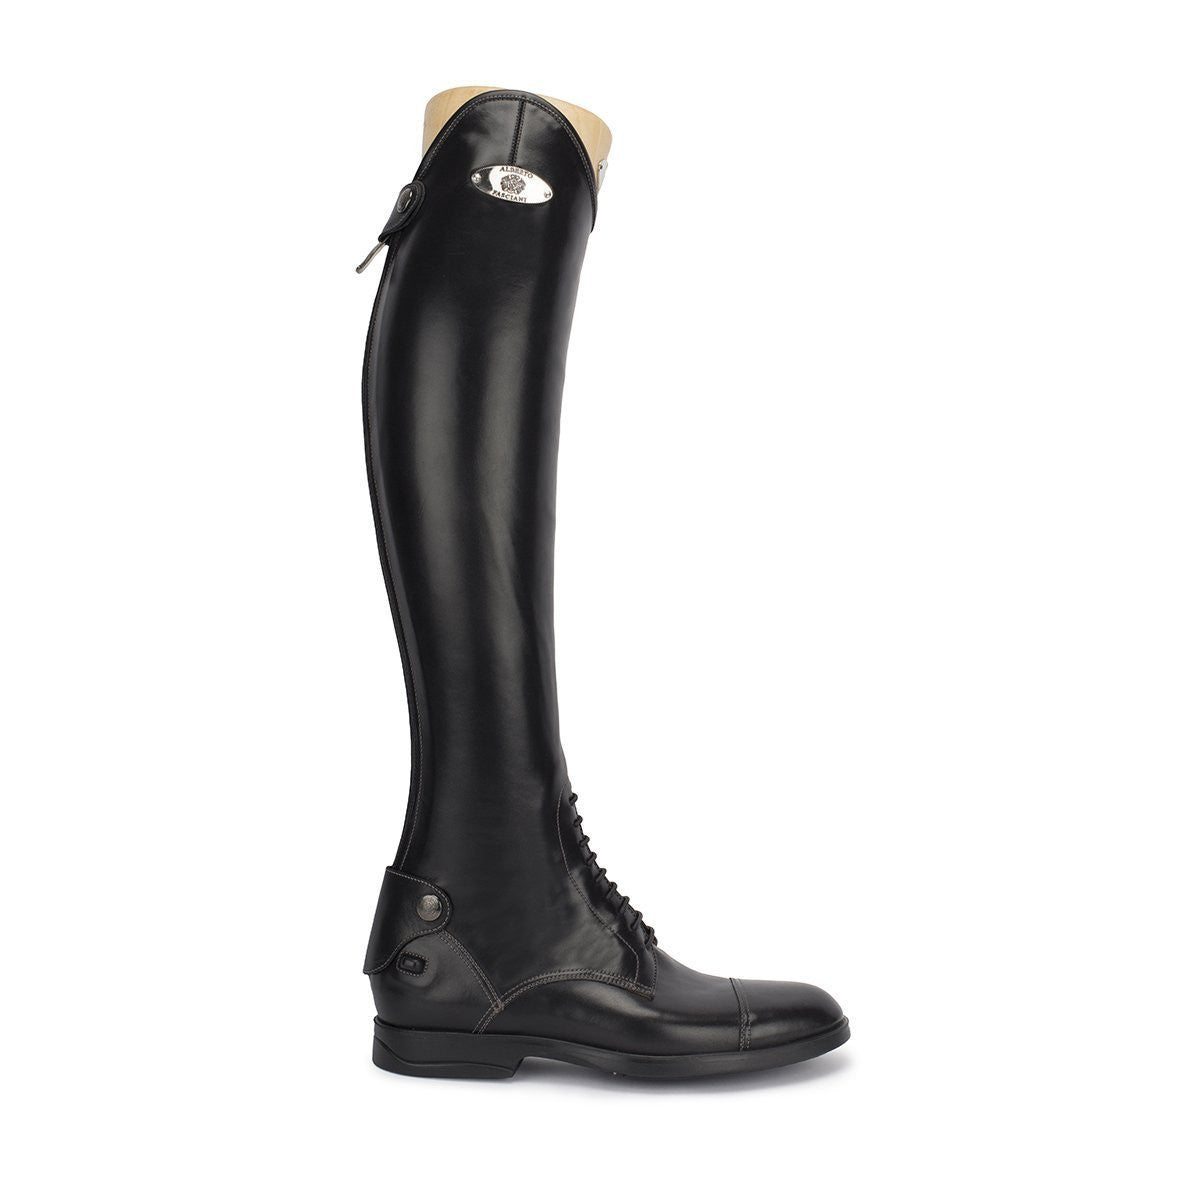 Alberto Fasciani's Leonardo is made in Super Natural calfskin leather. This showjumping boot is extremely soft and comfortable. The inner calf is a rubberised elastic grip system to fit smoothly against your leg. Equipped with back zip and elastic laces. The sole is with Blake stitch, latex rubber and anti-shock.

Semi-custom fit also available at $130 added to the boot price, please contact us to discuss further

100% Made in Italy

We are here to help should you need assistance with sizing